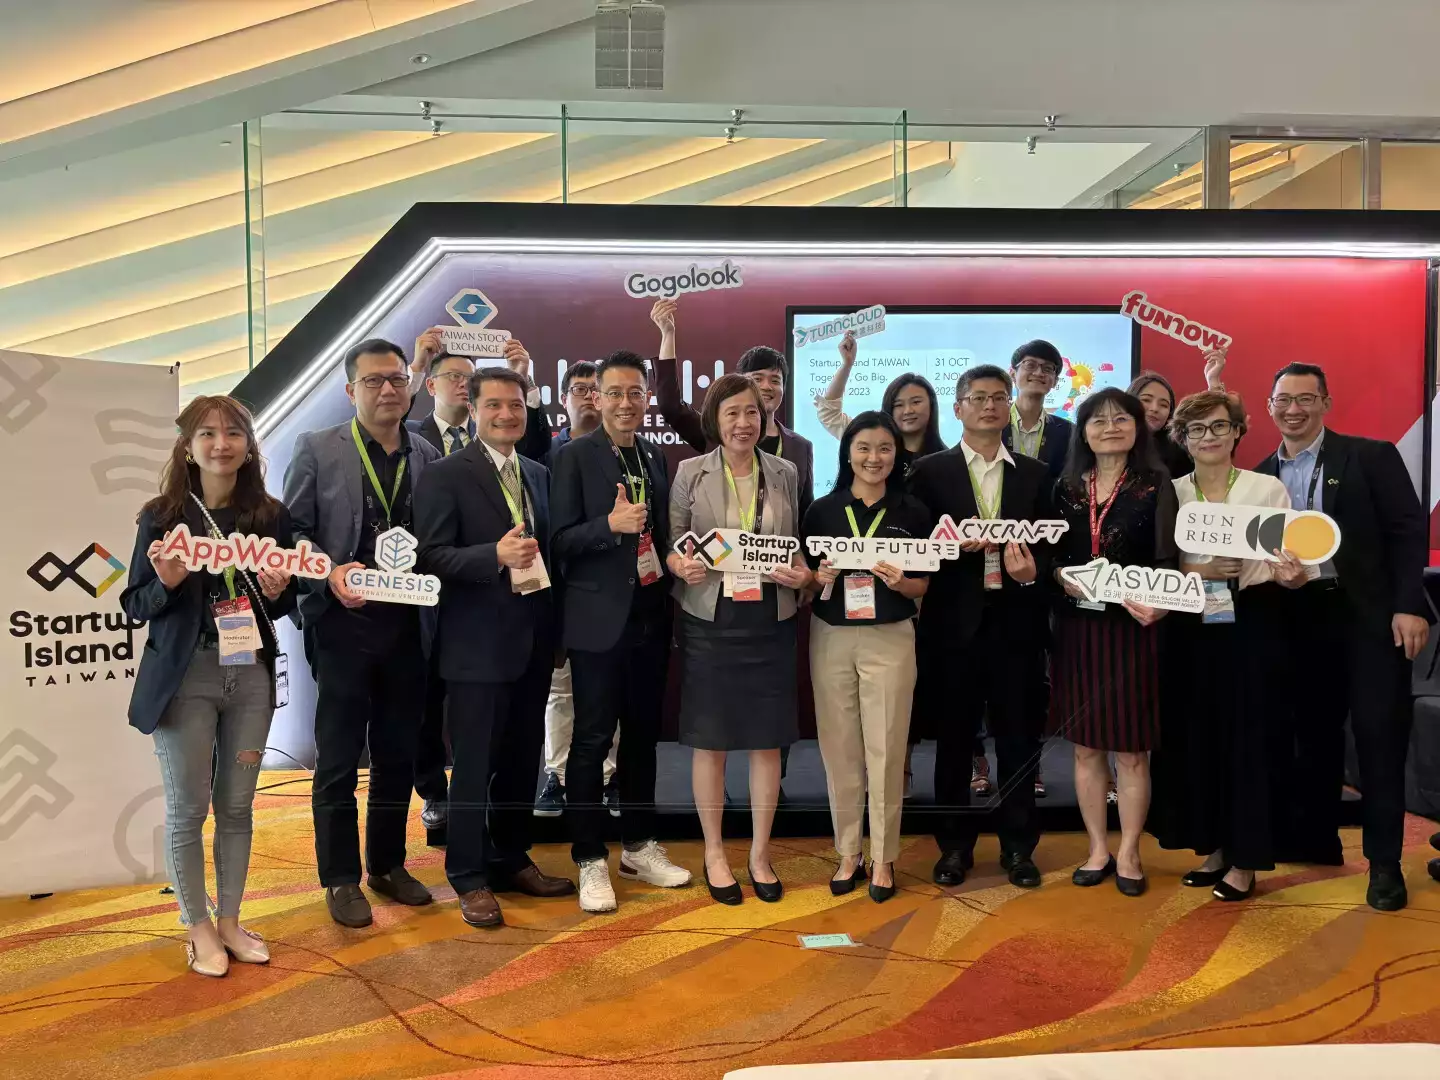 NDC Leads the Way to Singapore, Taiwan's Startups Bring Digital Technology Solutions